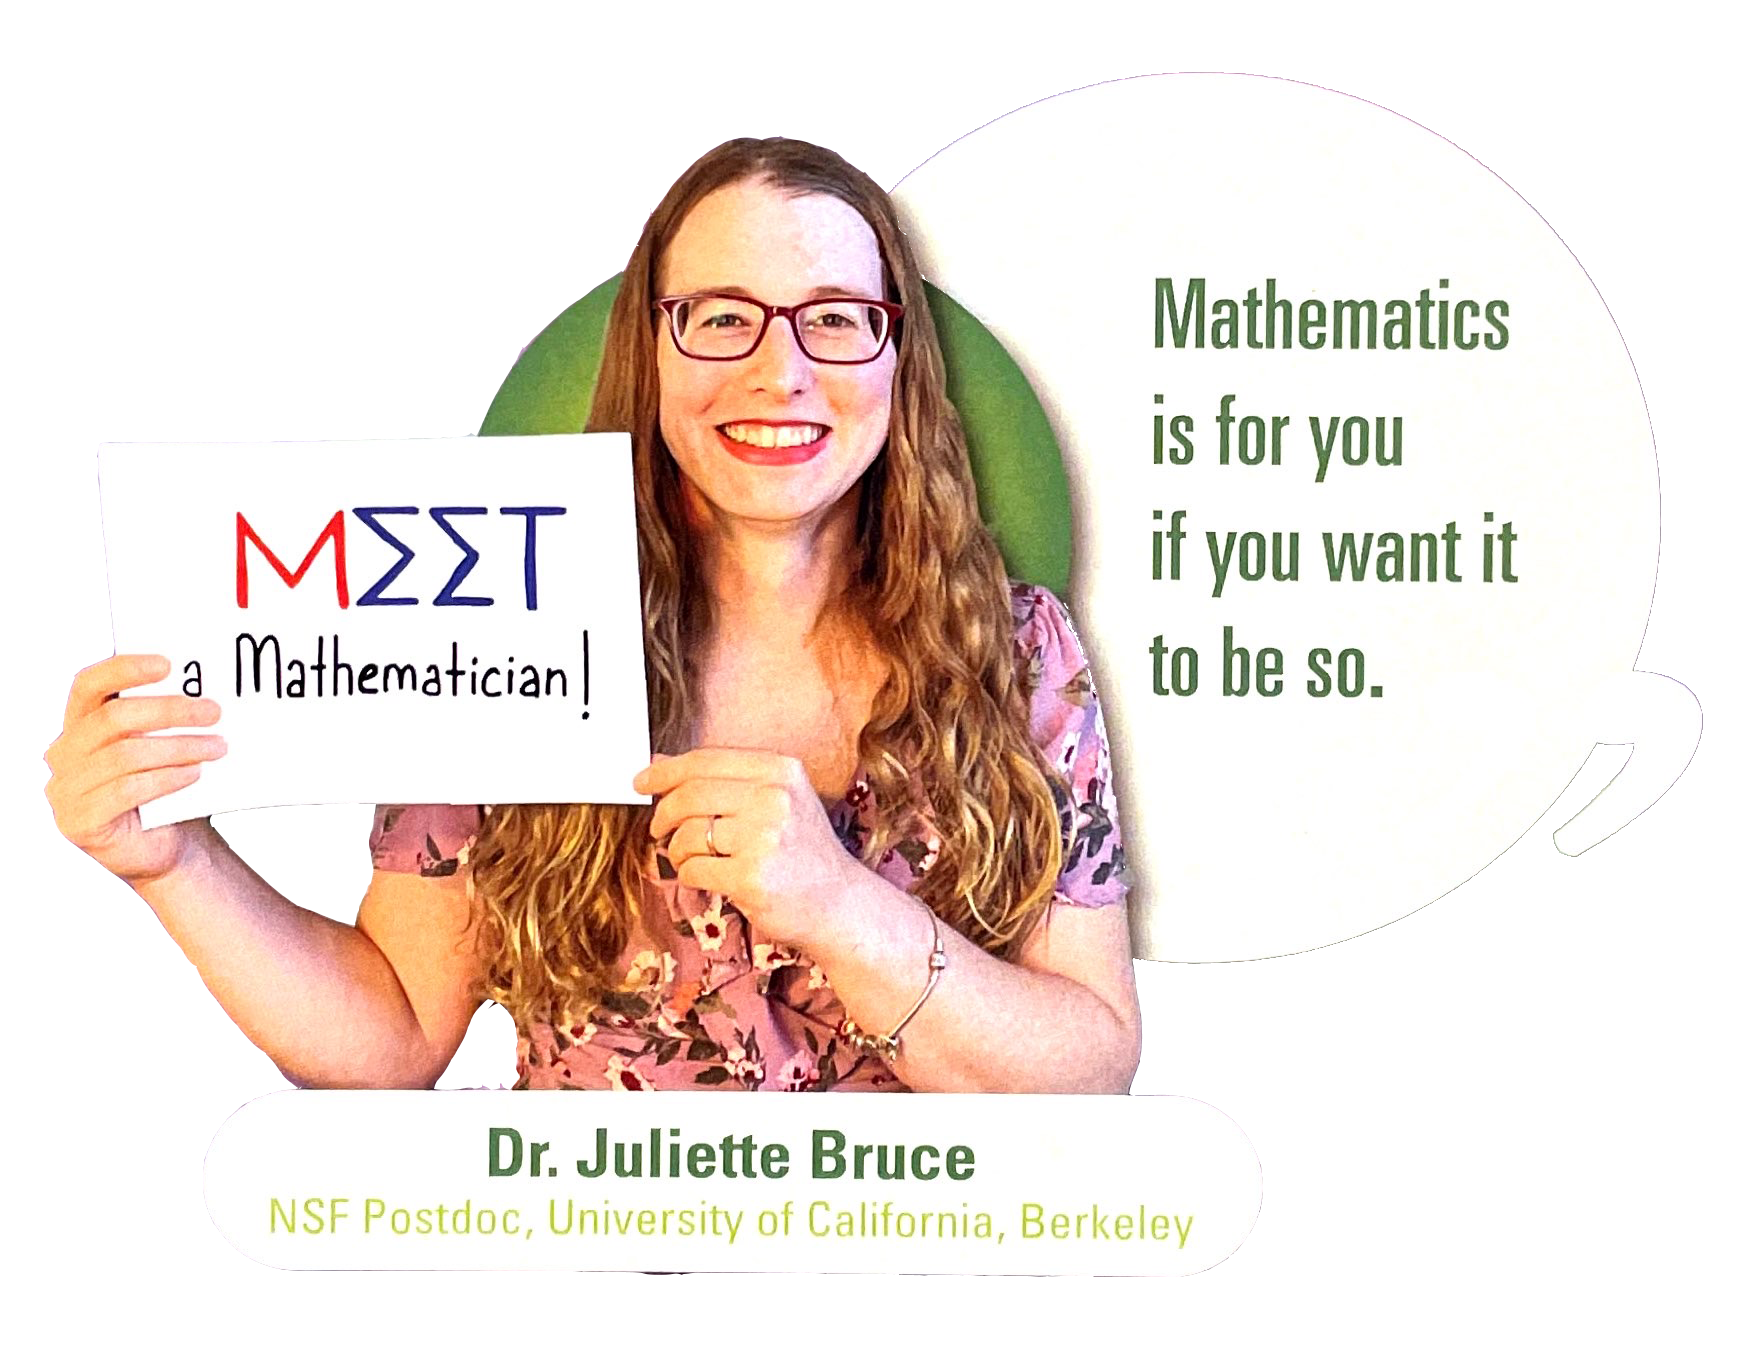 Spotlight: Meet a Mathematician - Dr. Juliette Bruce, NSF Postdoc, University of California, Berkeley. "Mathematics is for you if you want it to be so."